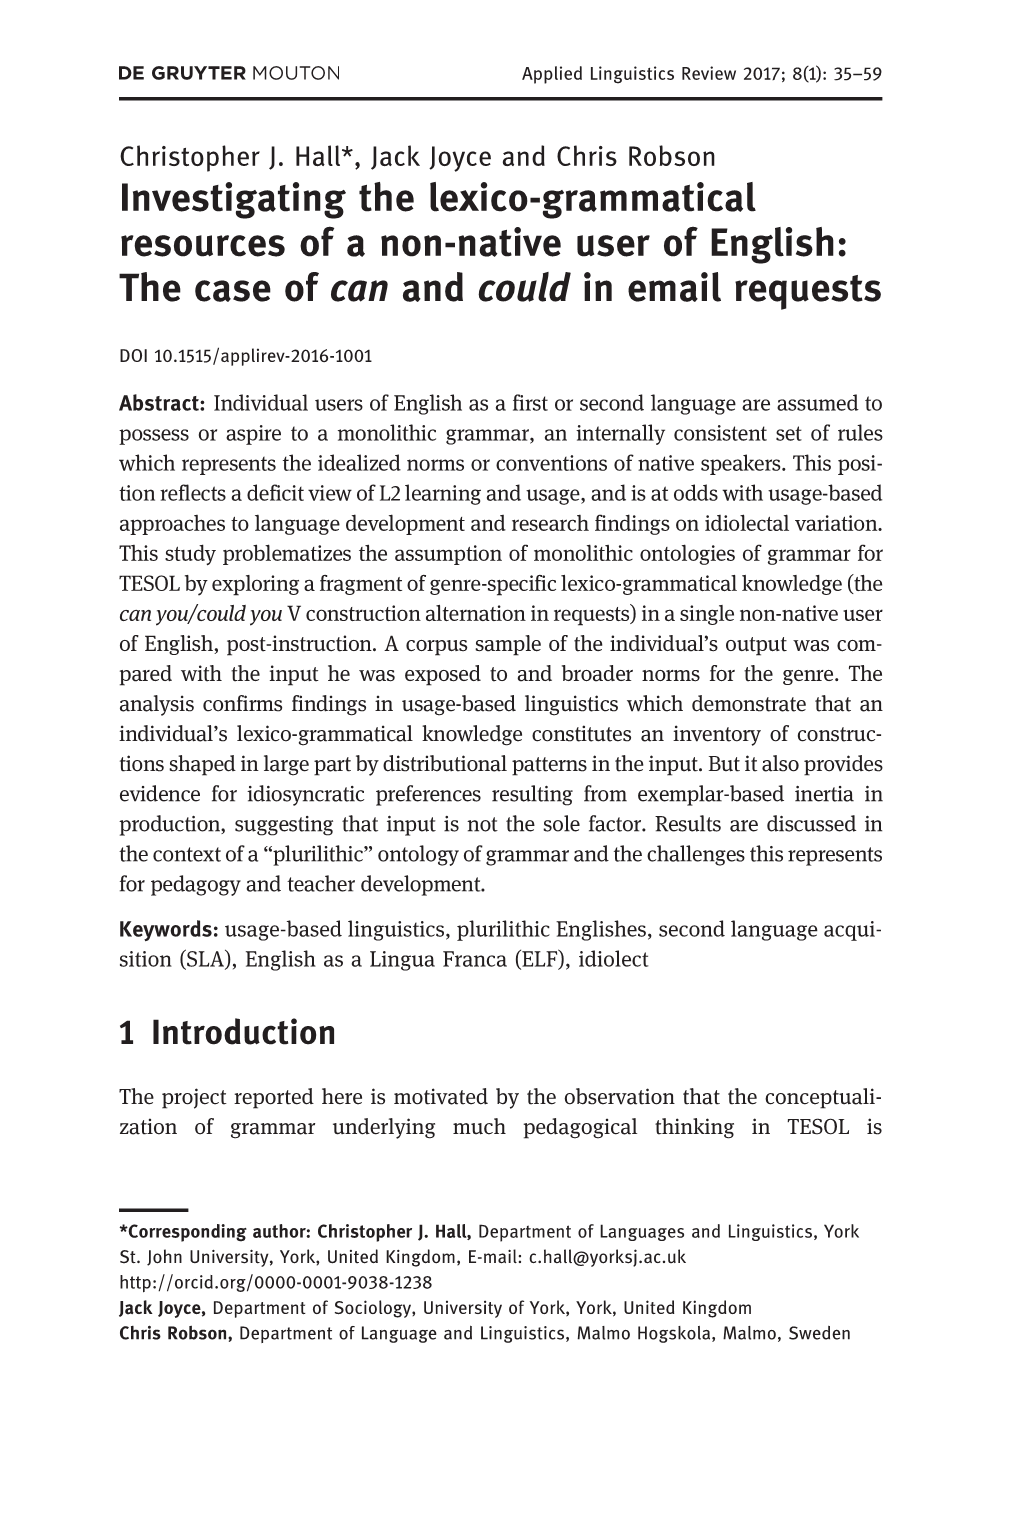 Investigating the Lexico-Grammatical Resources of a Non-Native User of English: the Case of Can and Could in Email Requests